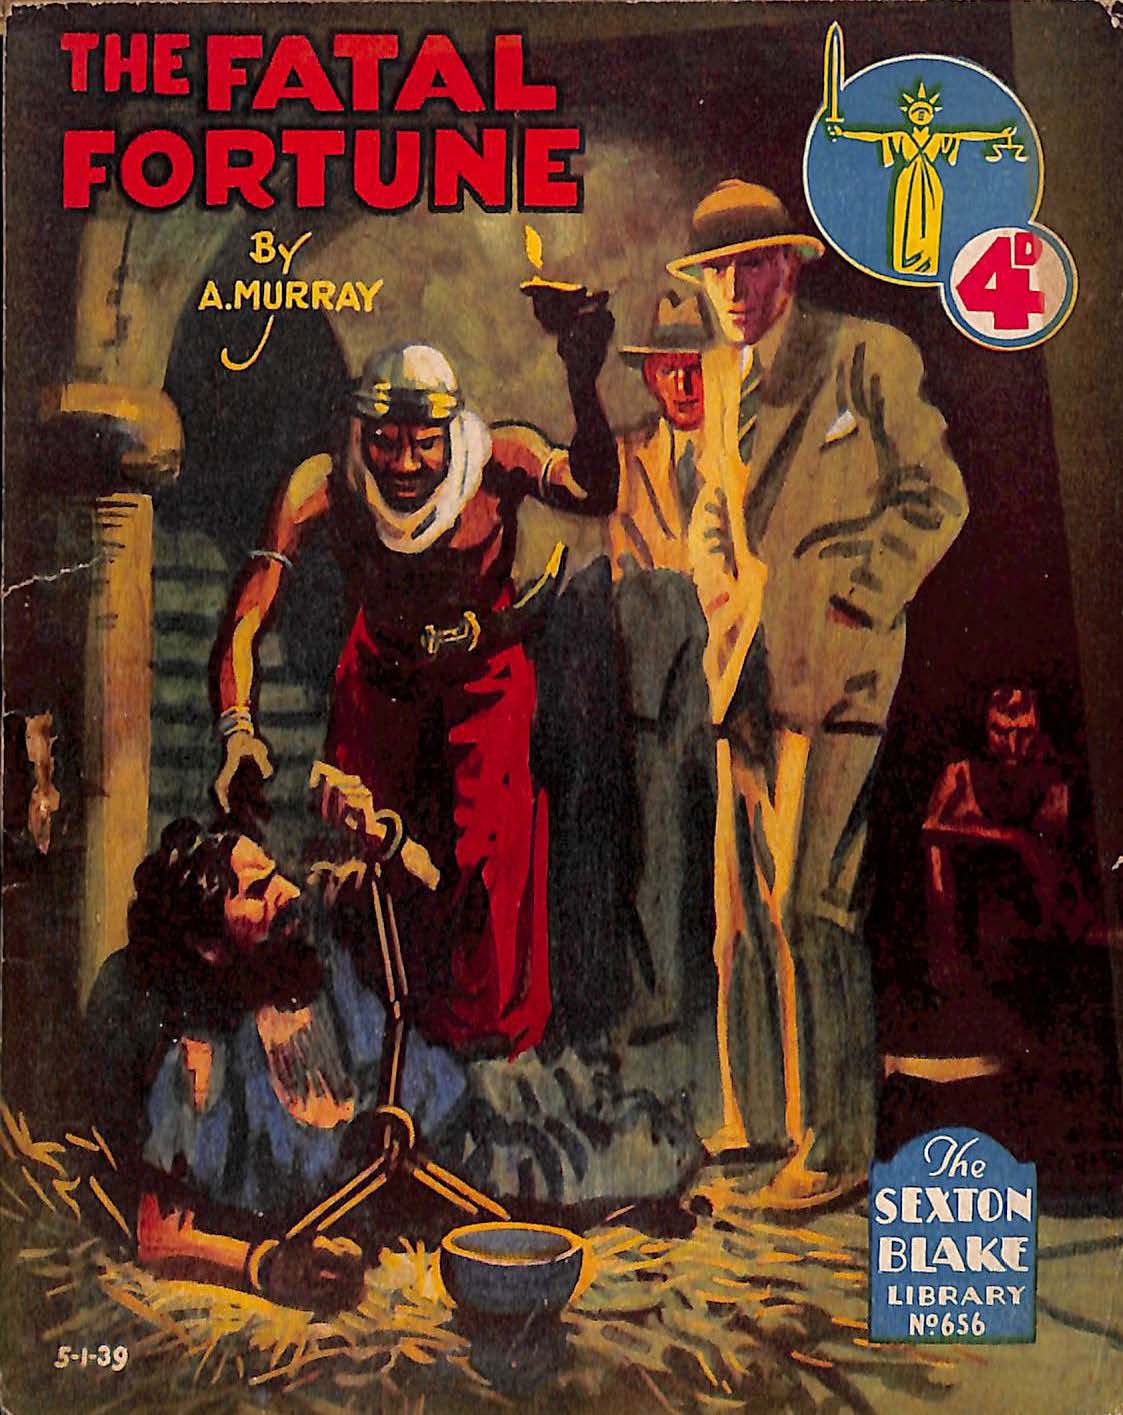 Book Cover For Sexton Blake Library S2 656 - The Fatal Fortune